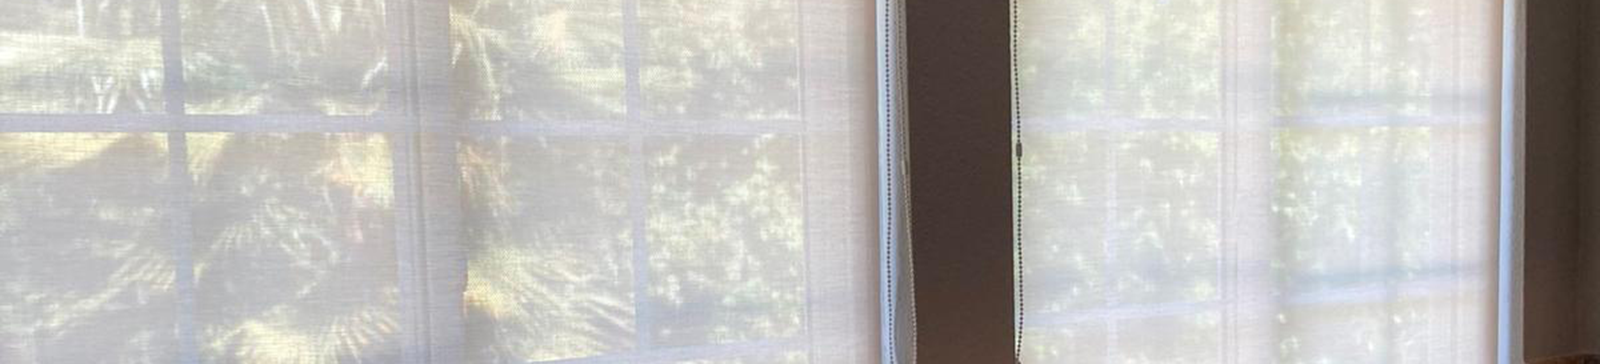 Sheer Roller Shades for Inspiring Window Treatments in San Francisco